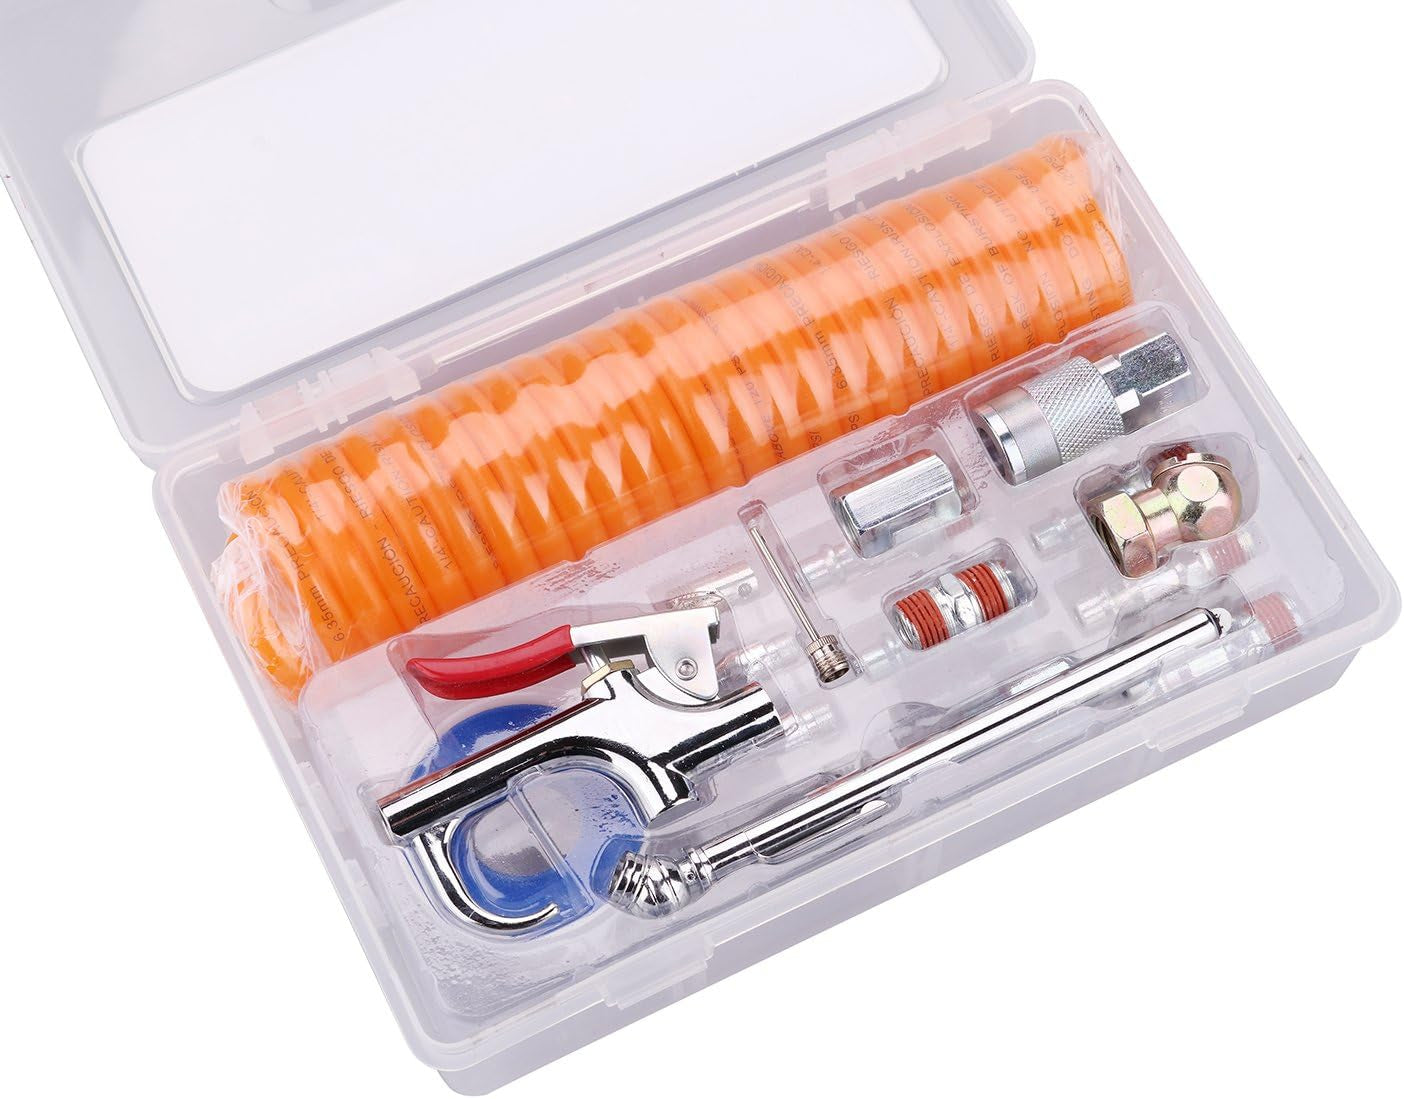 20 Piece Air Compressor Hose Tool Kit  1/4 Inch NPT Air Accessory Kit with Coil PU Hose/Blow /Tire Gauge/Storage Case